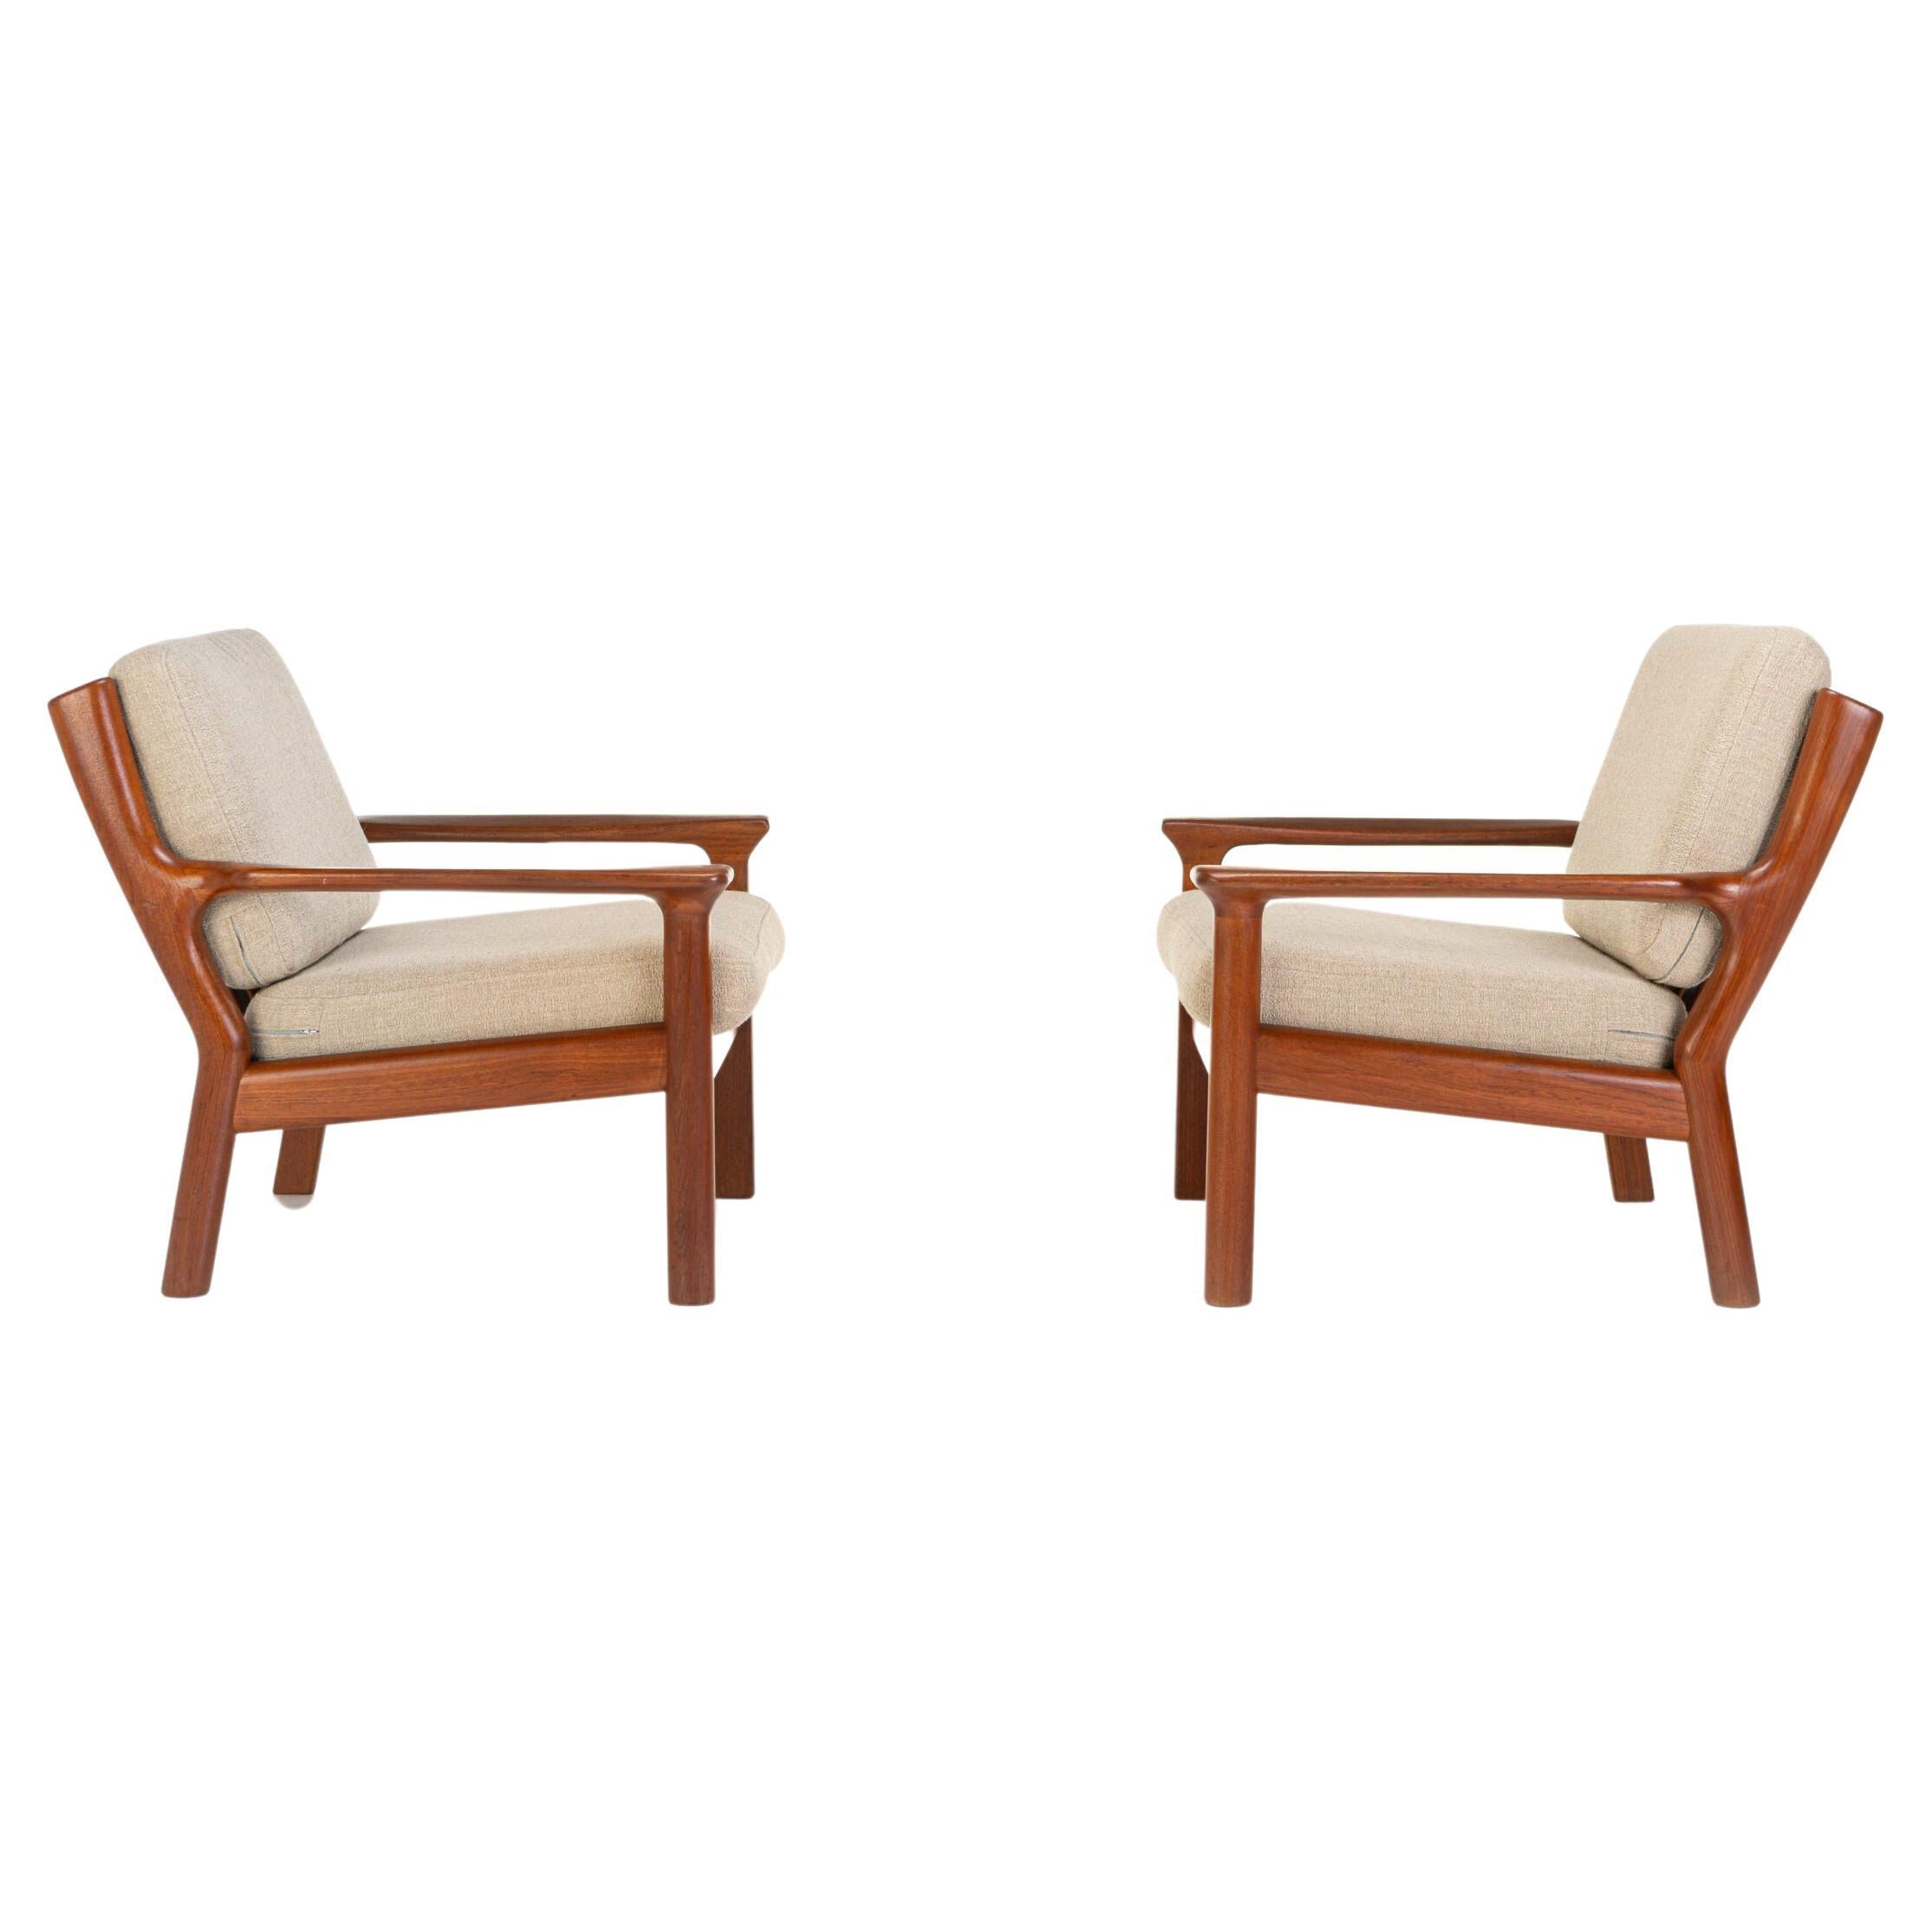 Pair of Two Lounge Chairs by Glostrup Møbelfabrik, Denmark 1960s